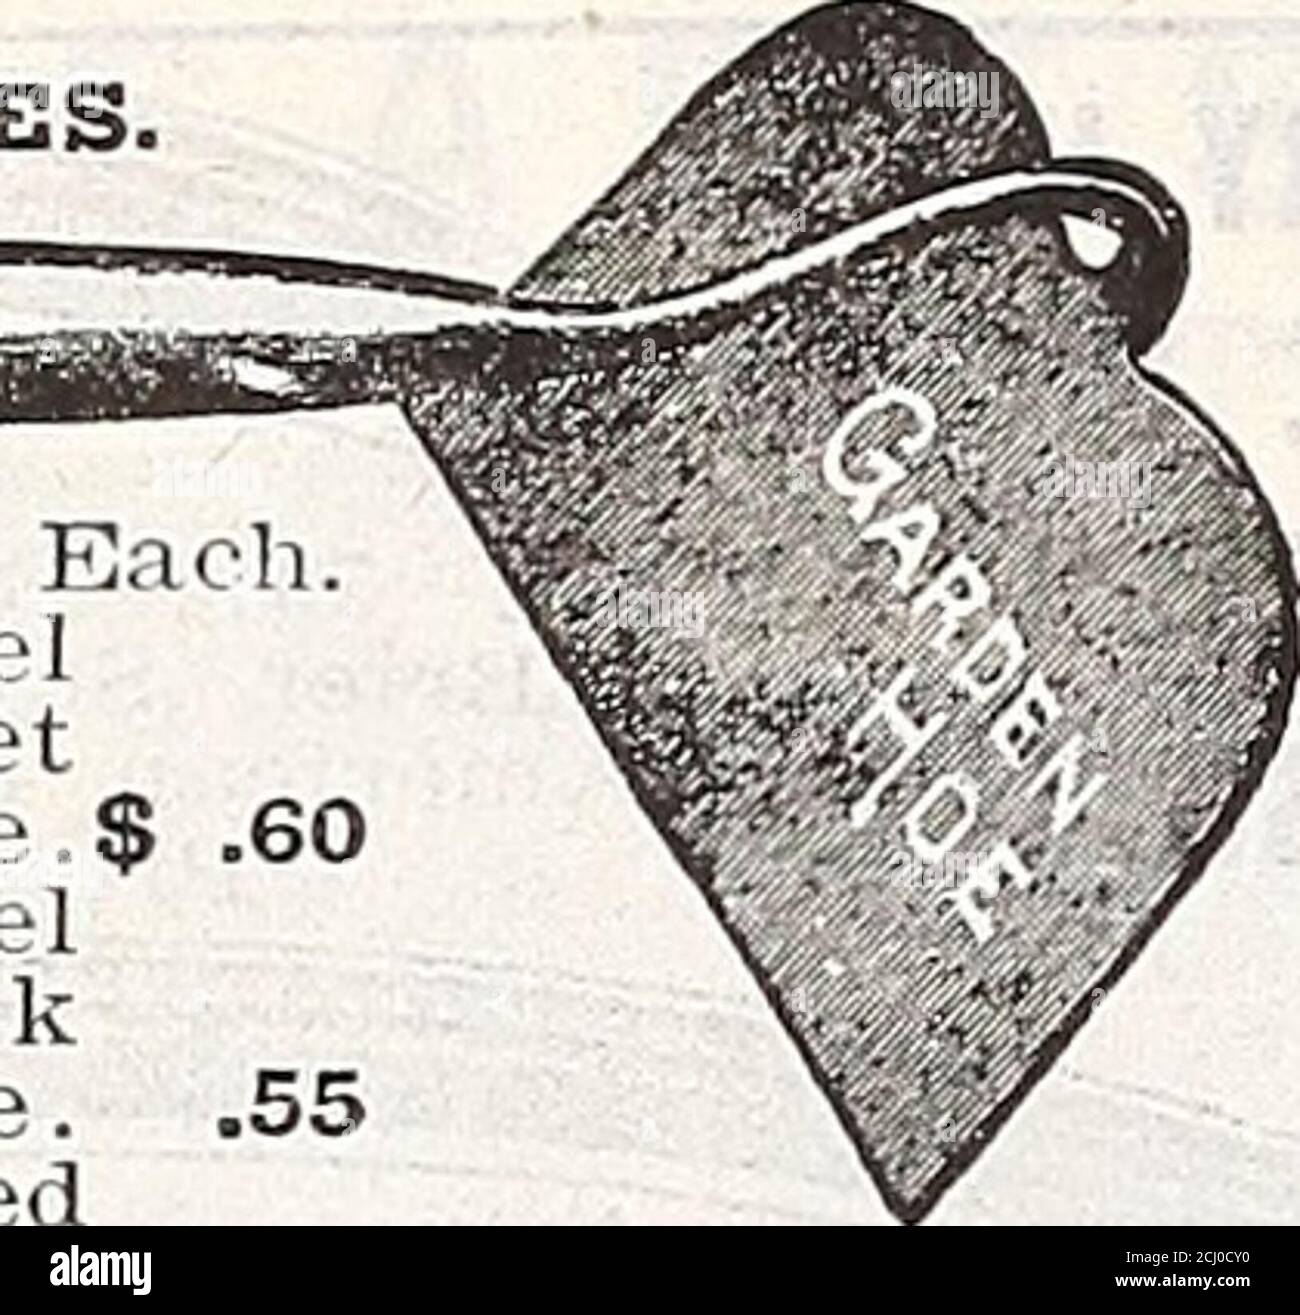 . 1915 Griffith and Turner Co. : farm and garden supplies . r & Deming1 and 2, withIjtth List Retailin. Pr. ea. Pr. ea.$1.35 $0.671.401.451.501.601.70 1. tO1.902.002.102.202.25 2. -02.352.402.502.602.702.F02.903.003.103.20 inches 666fi6666 2% .70.73.75.80.85.90.951.001.051.101.131.151.181.201.251.301.51.401.451.501.551.60long Bit-Stock Drills FOB METAI. OB WOOD, No. 109. 01V o o meter.  c 4.O E.d ^ o o c: ea Dia w ^i- 6.30 3.15 .54 .27 12-3 2 7.20 3.60 .62 .31 13-3 J 8.00 4.00 .68 .34 1 ri-?2 9.60 4.80 .82 .41 ir.-3L 10.30 5.15 .87 .45 !i-1 R 14.35 1.20 .60 16.15 1.35 .65 3-4 19.75 1.65 .85 T Stock Photo